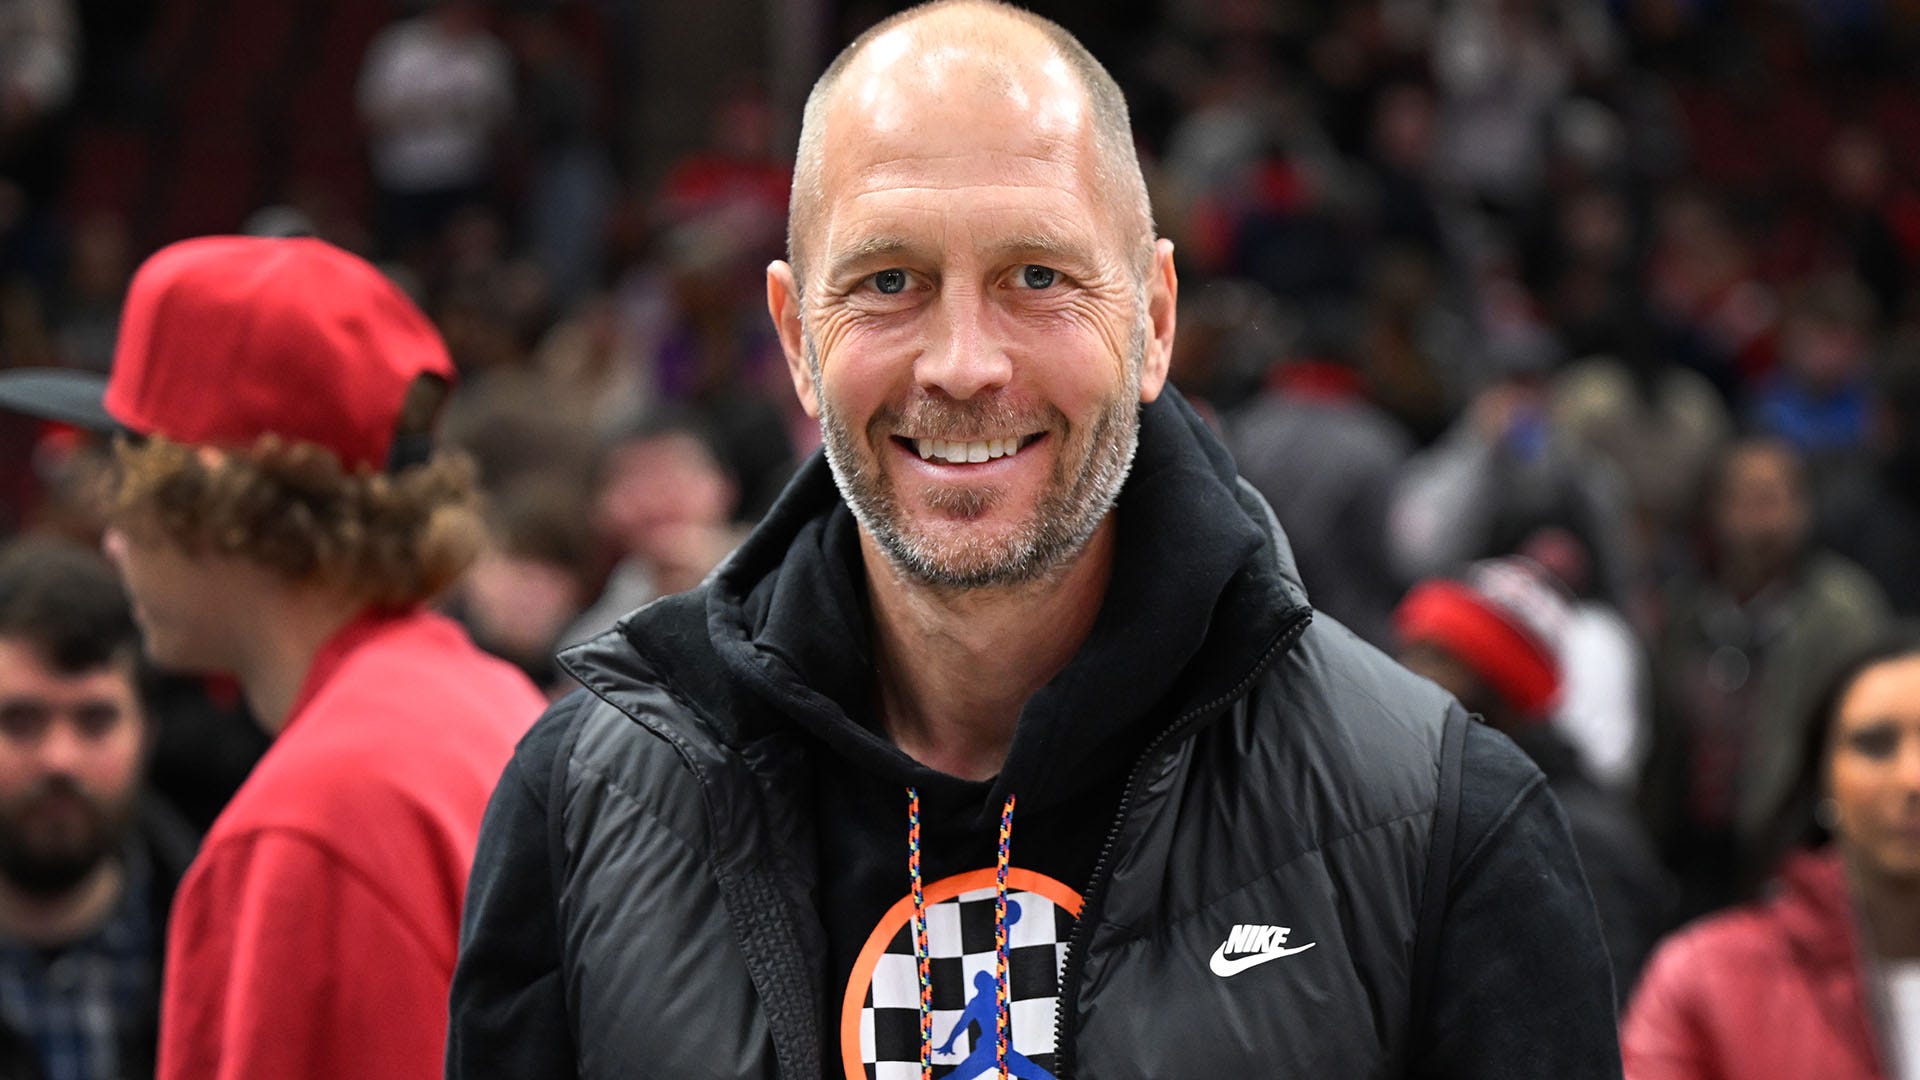 'We're glad that it's finished' – Ex-USMNT coach Gregg Berhalter reacts to release of U.S. Soccer investigation findings